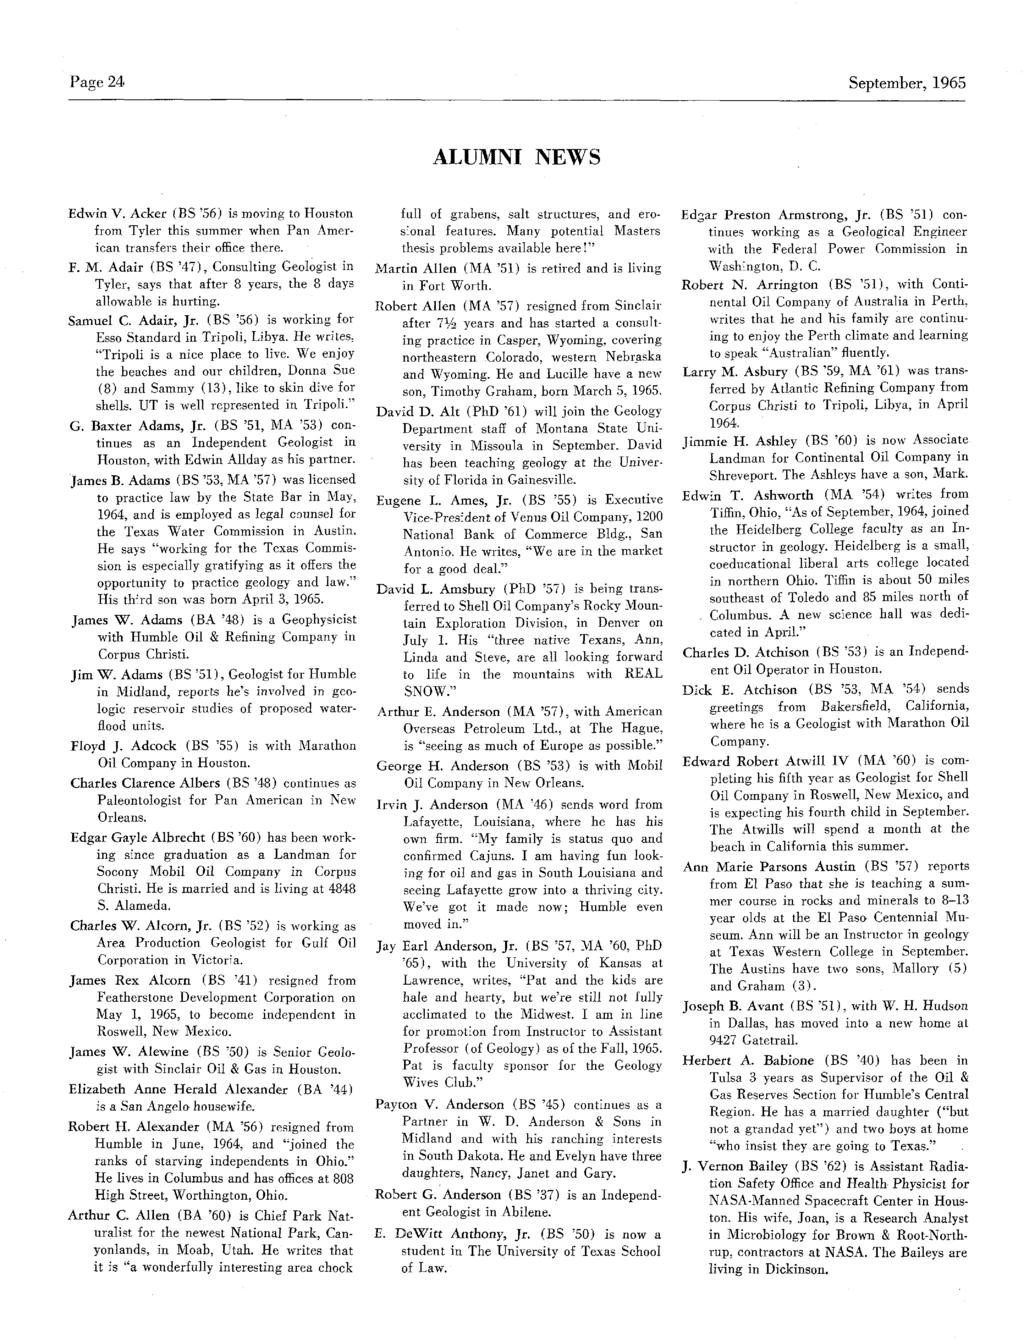 Page 24 September,1965 ALUMNI NEWS Edwin V. Acker (BS '56) is moving to Houston from Tyler this summer when Pan American transfers their office there. F. M.